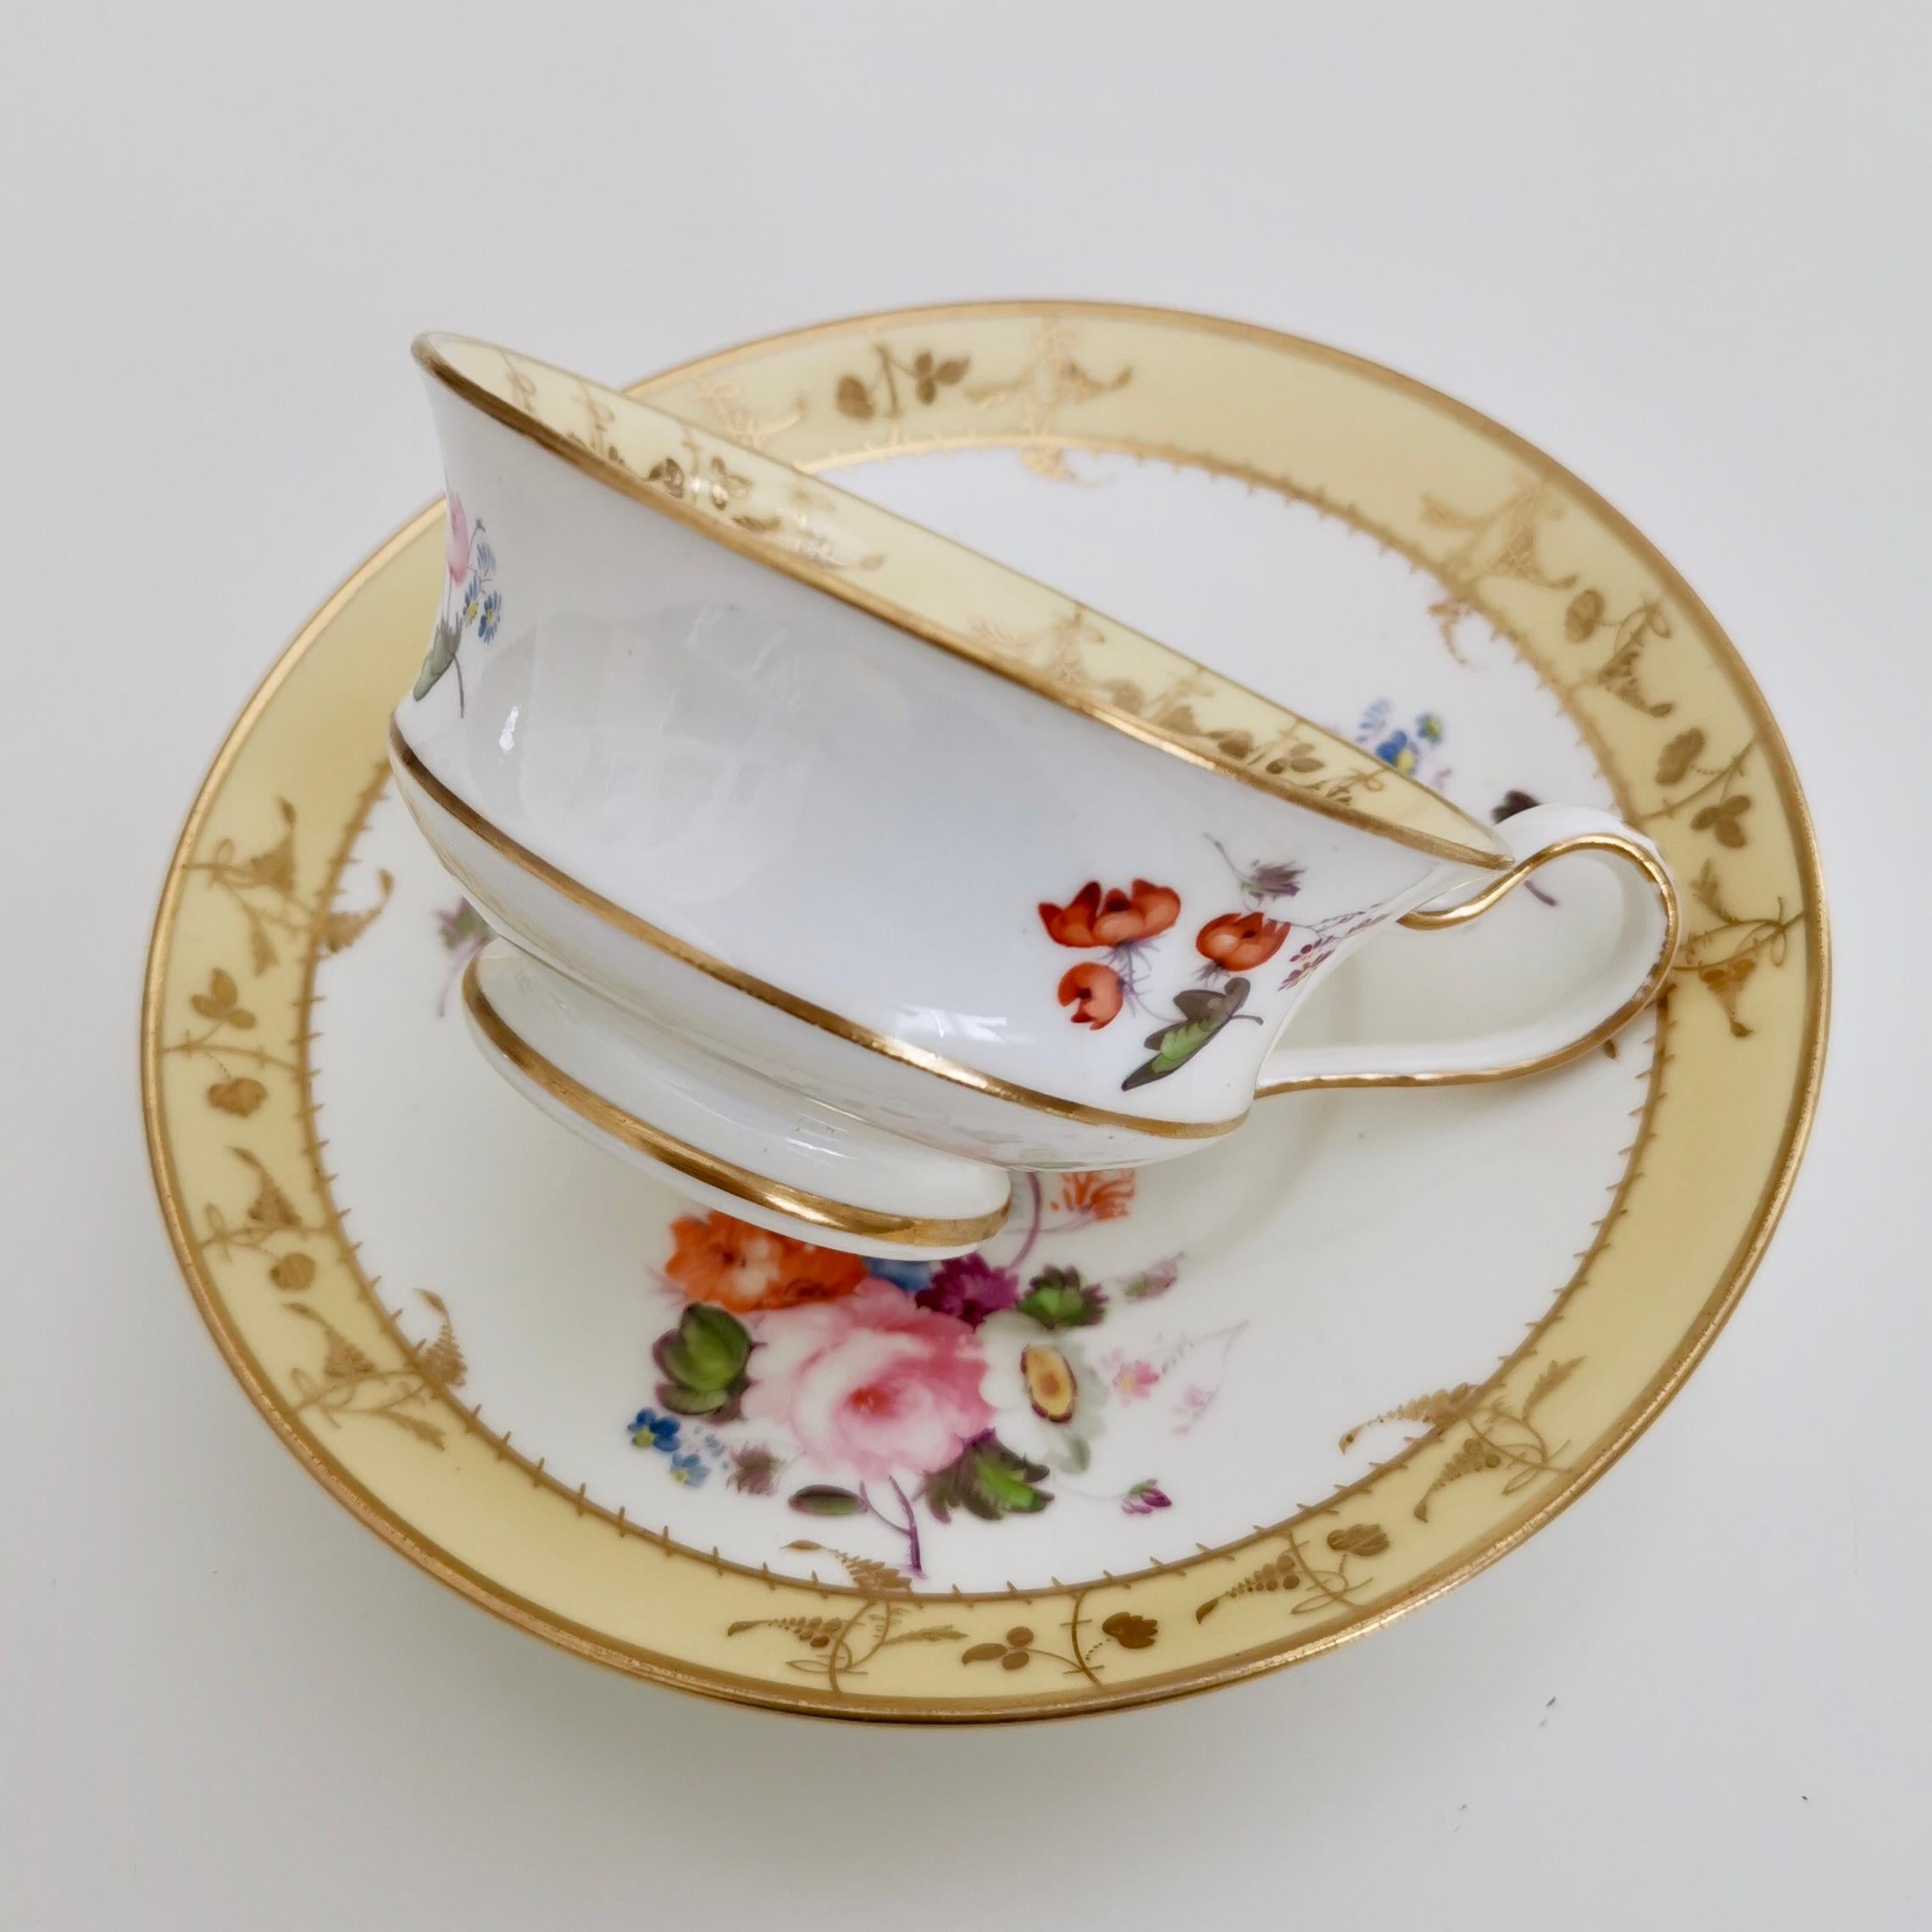 Hand-Painted Minton Porcelain Teacup, Yellow with Hand Painted Flowers, Regency, circa 1825